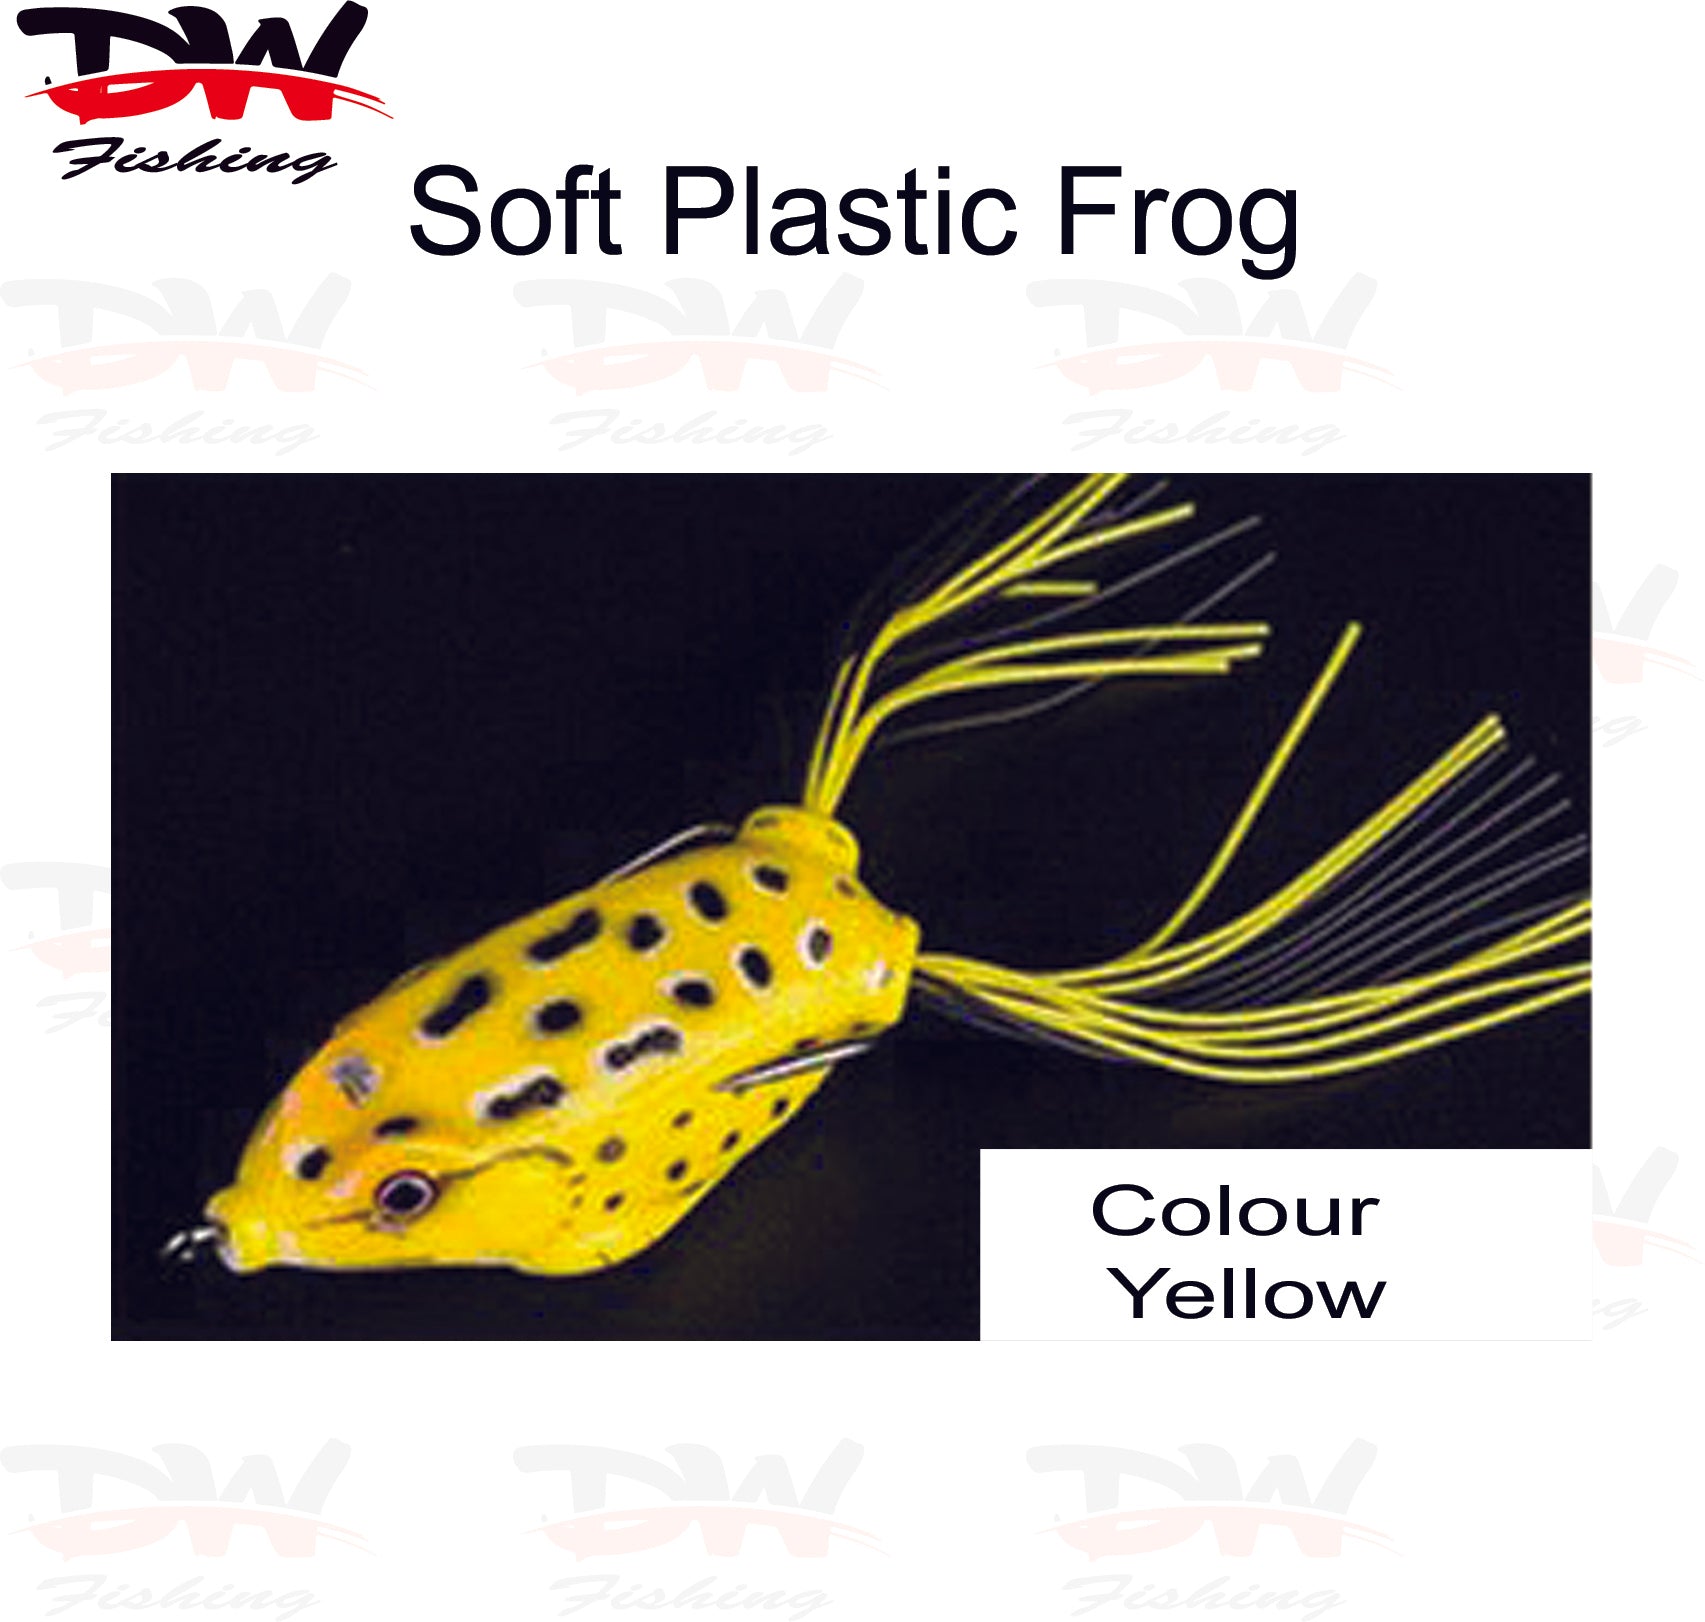 3D Surface Frog Lure, Fishing Lure Online